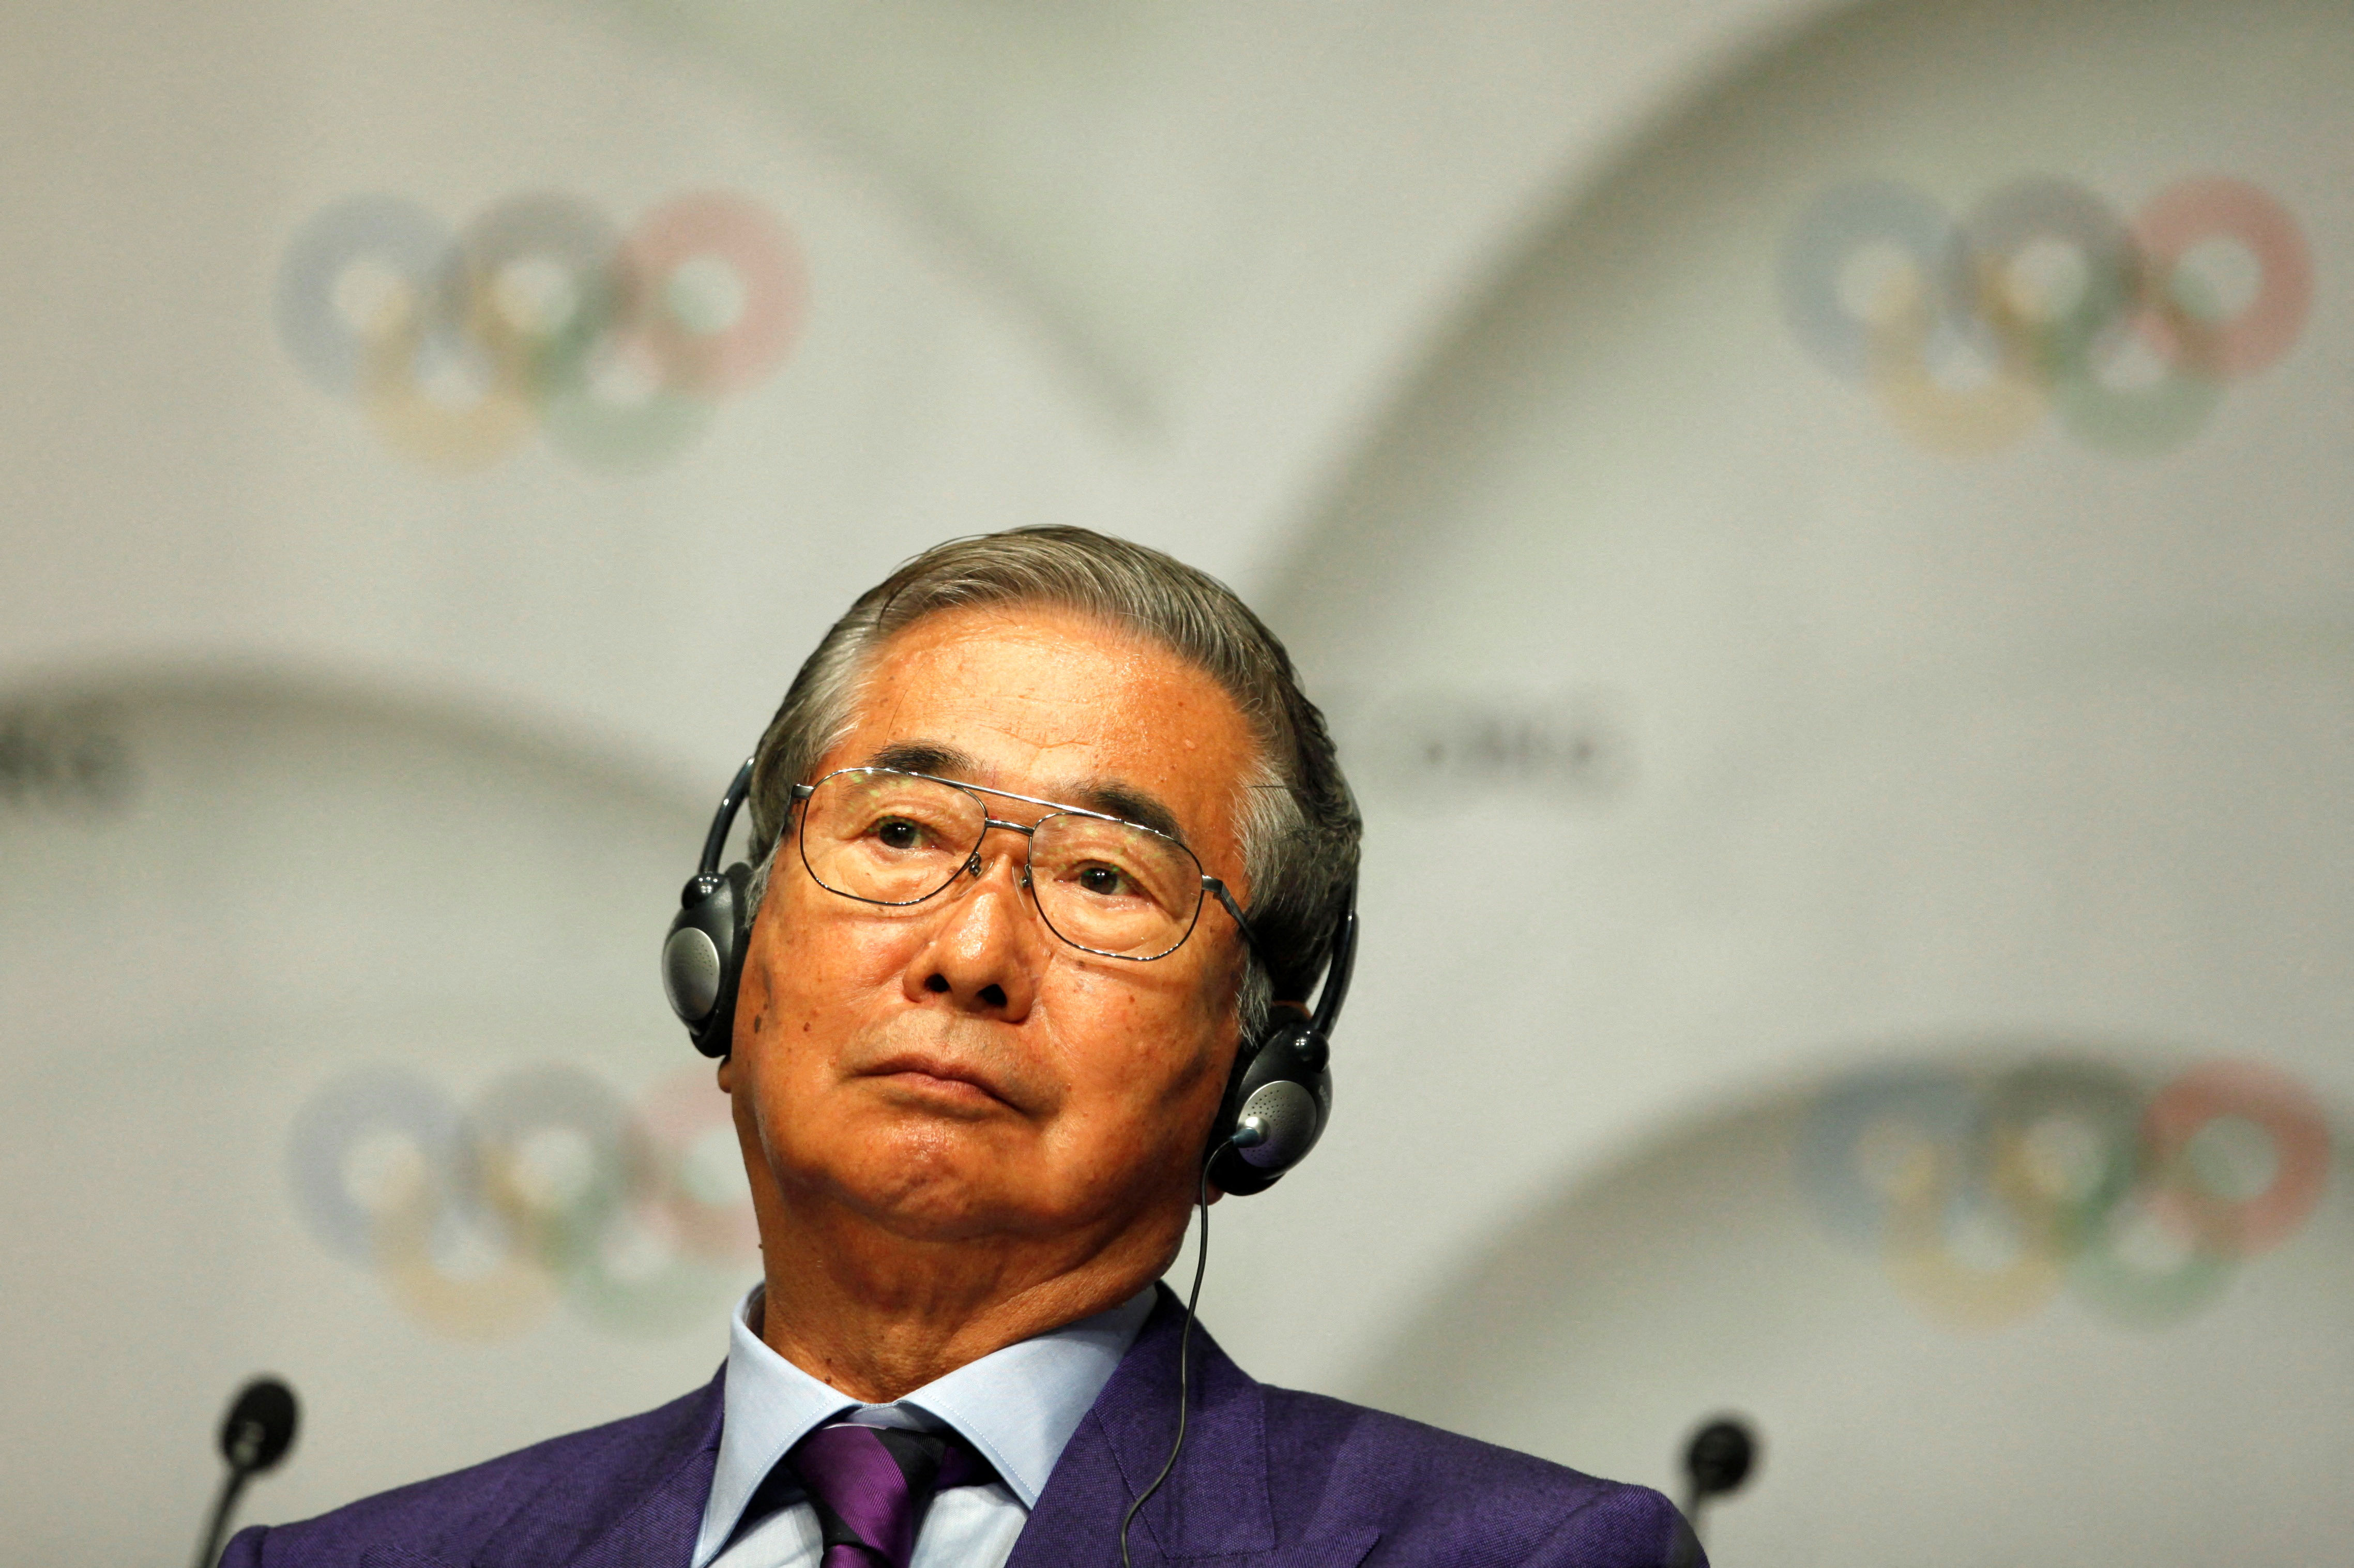 Governor of Tokyo Ishihara holds a news conference after presentation of Tokyo's candidature for 2016 Olympic Games to IOC members in Copenhagen